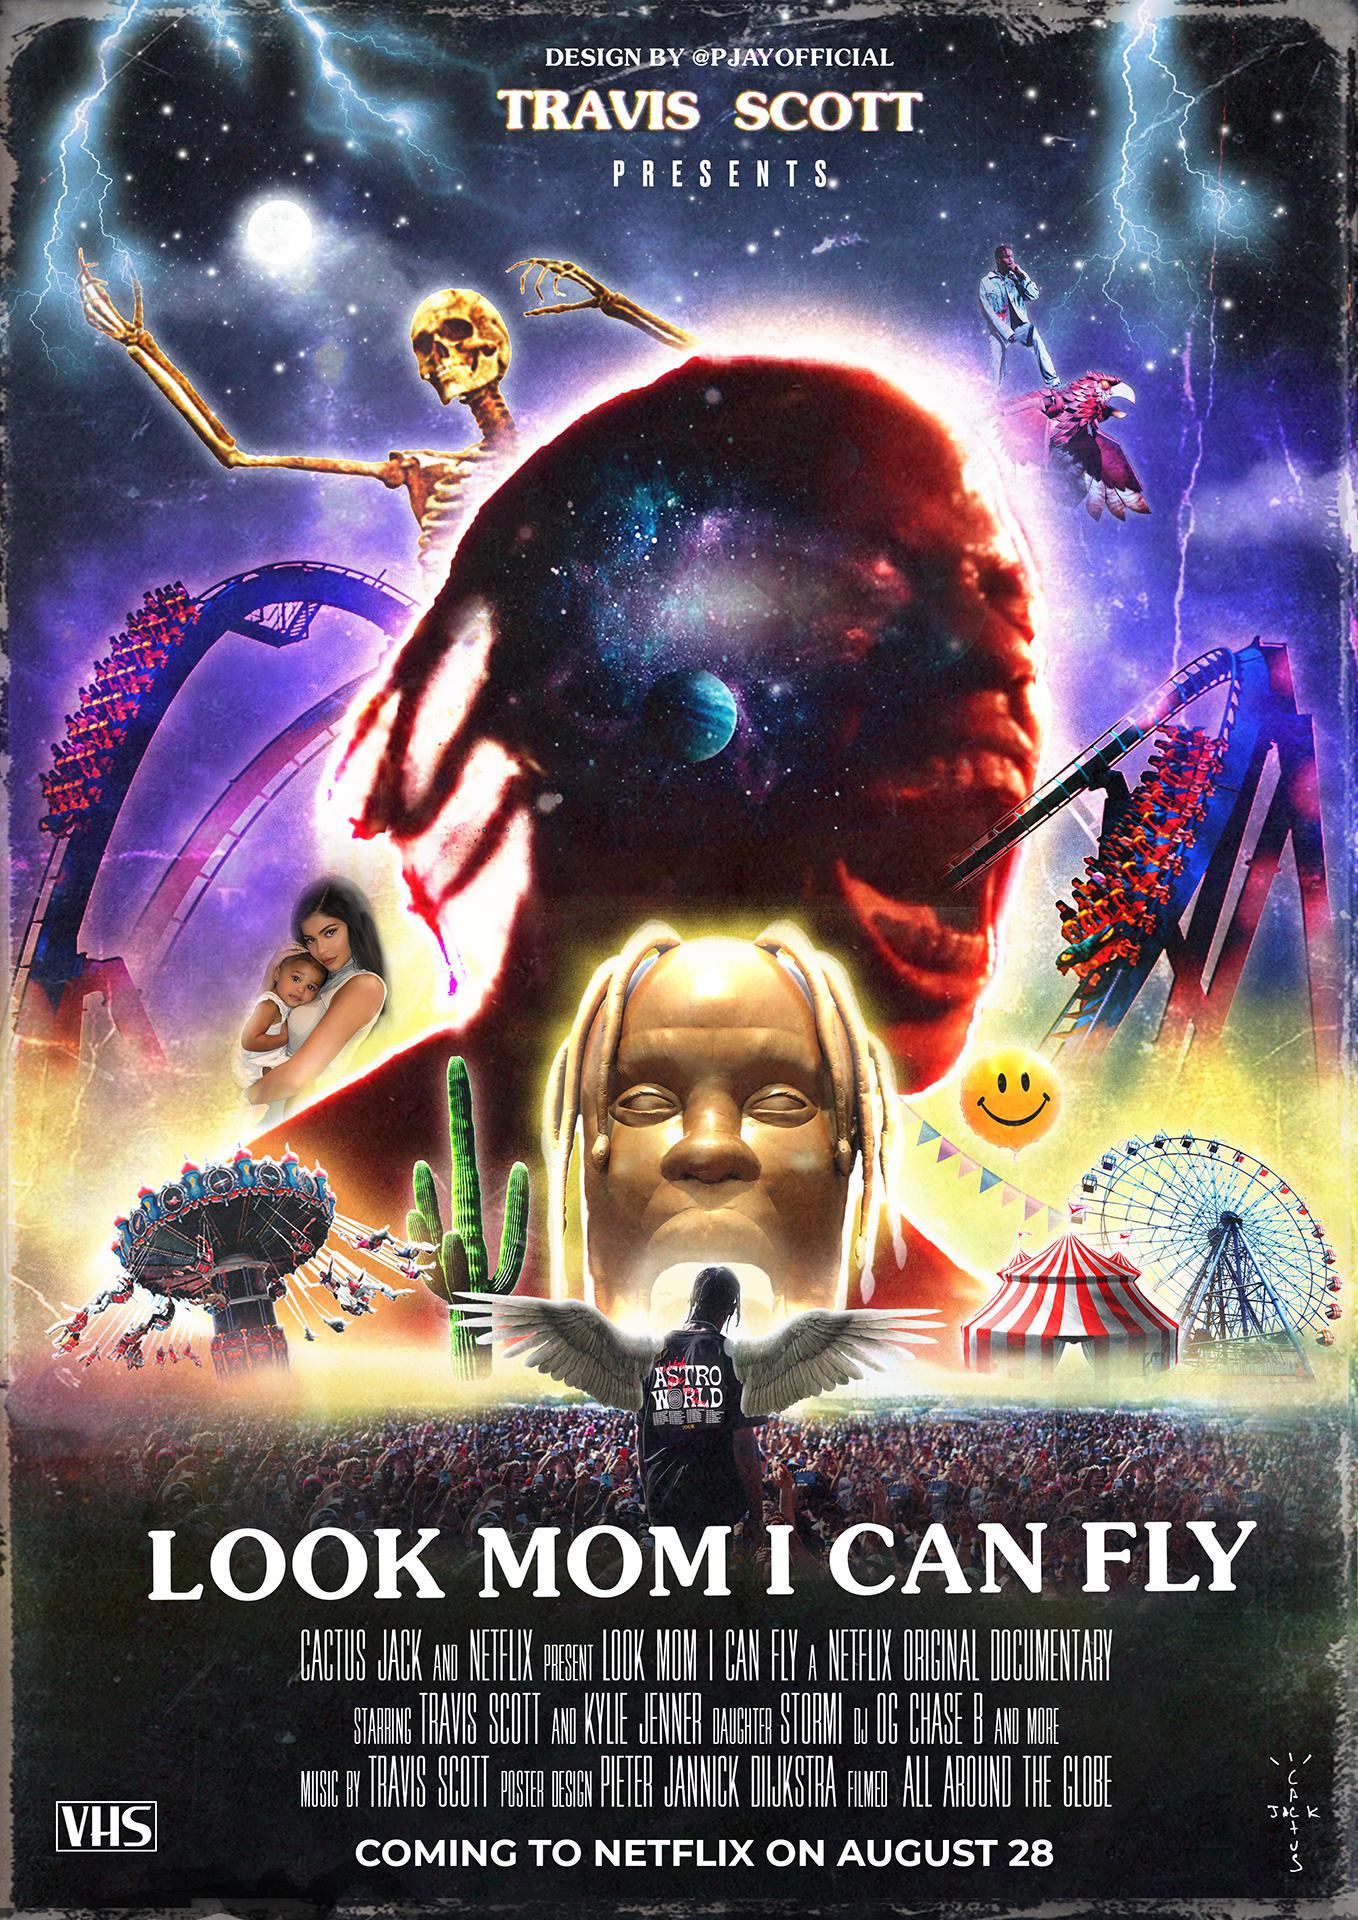 Look mom I can fly movie poster I made